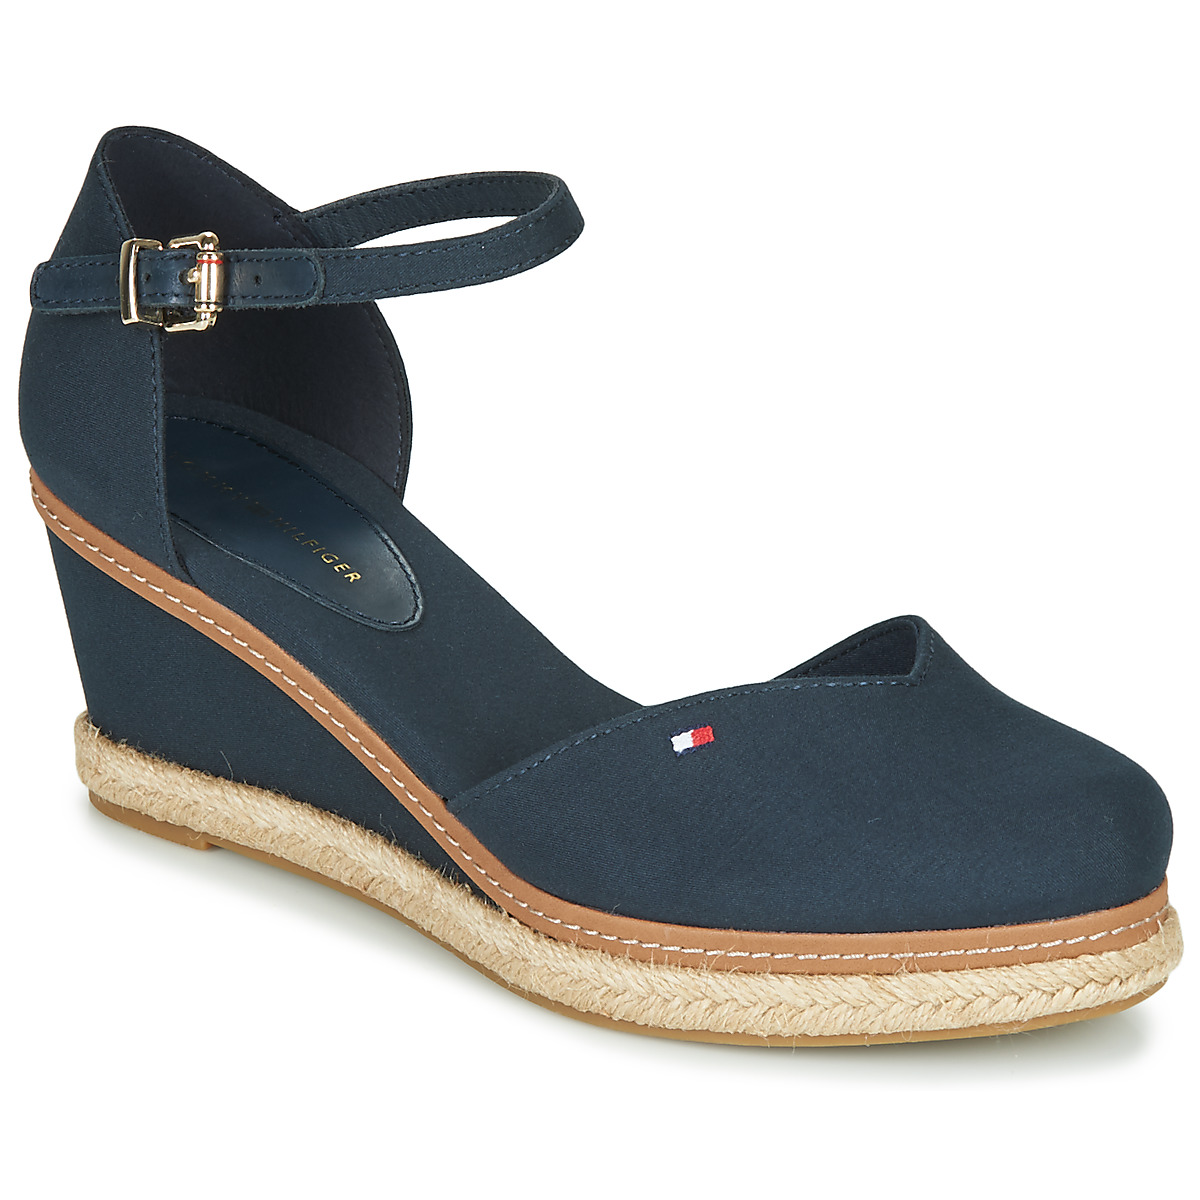 Chaussures Femme Tommy tech Hilfiger TOMMY tech JEANS SEASONAL ESPADRILLE BASIC CLOSED TOE MID WEDGE Bleu